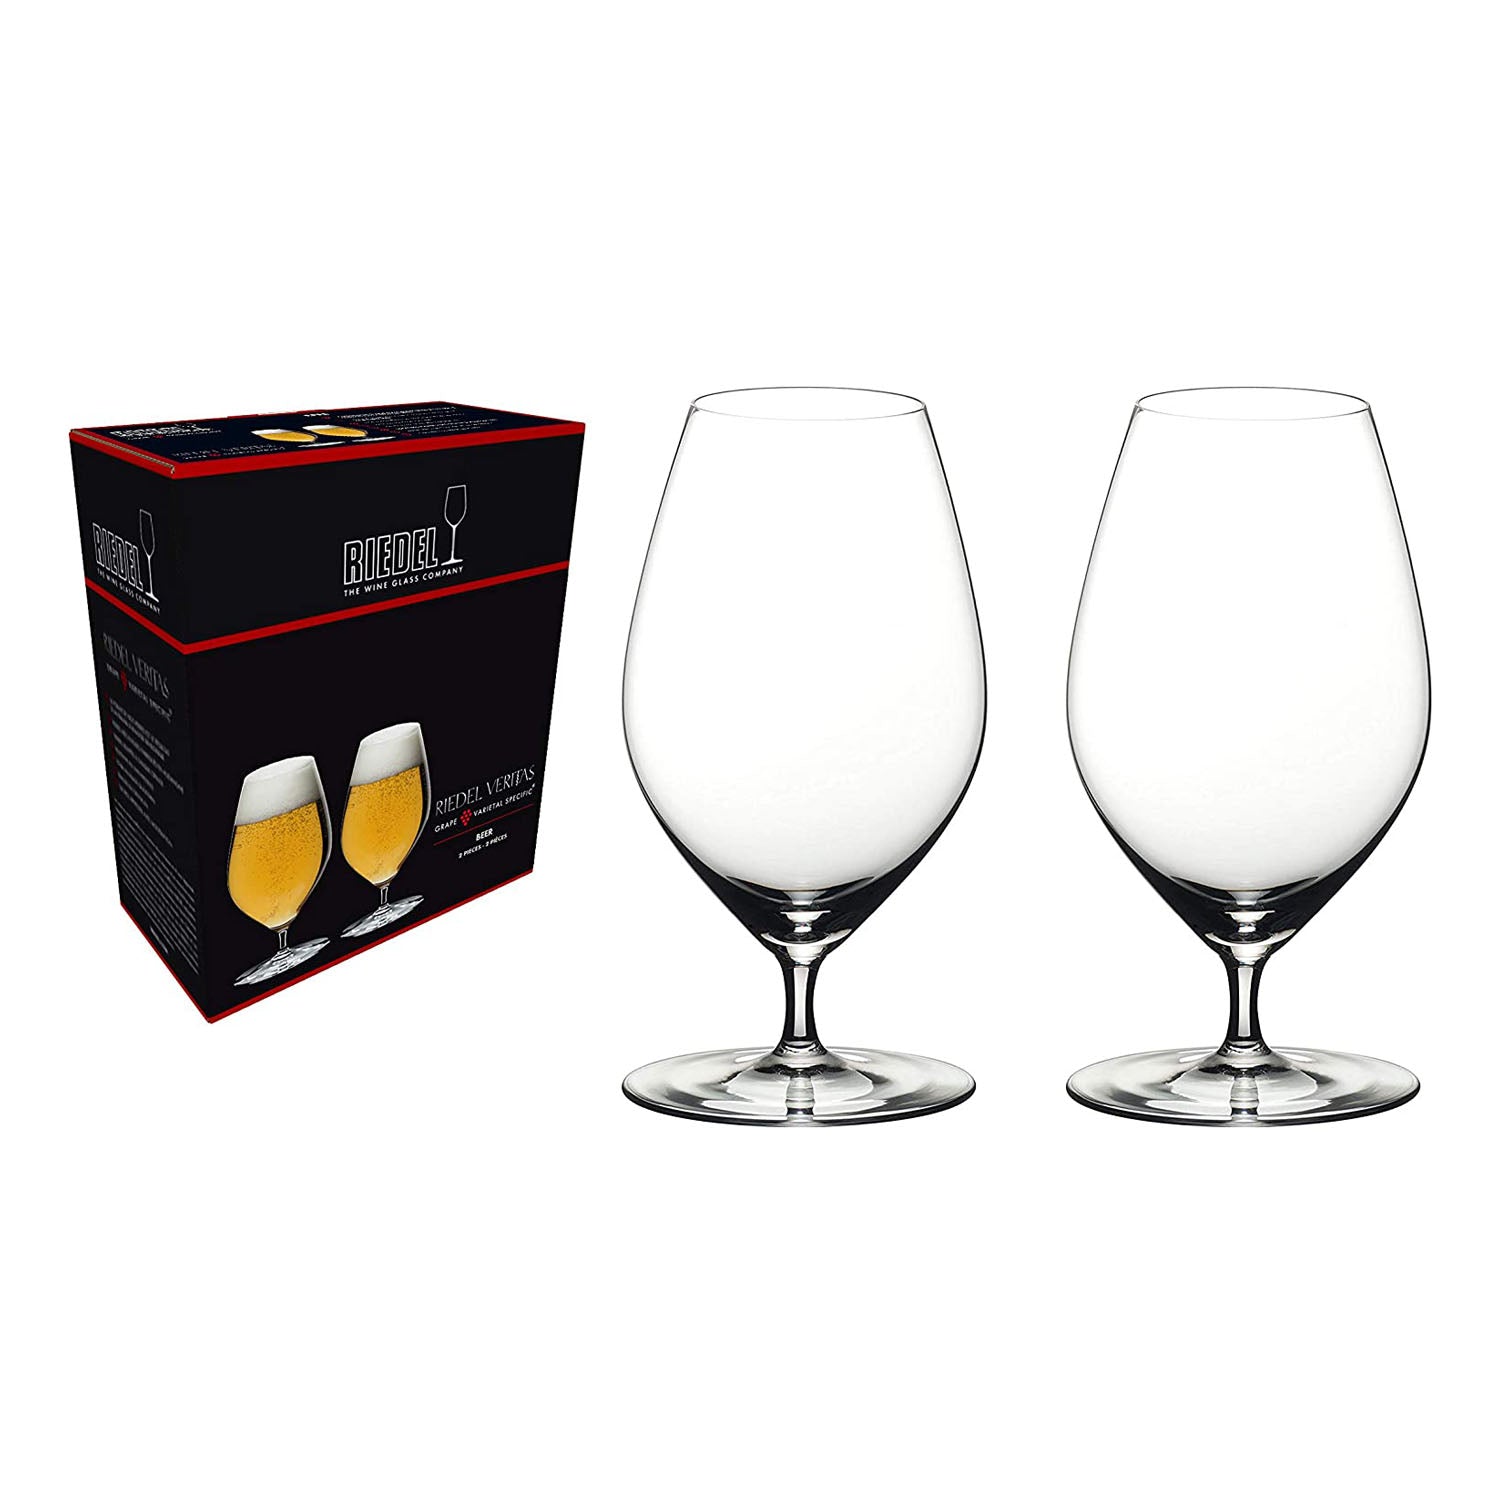 Riedel Veritas Champagne Glass, Clear - 2 count